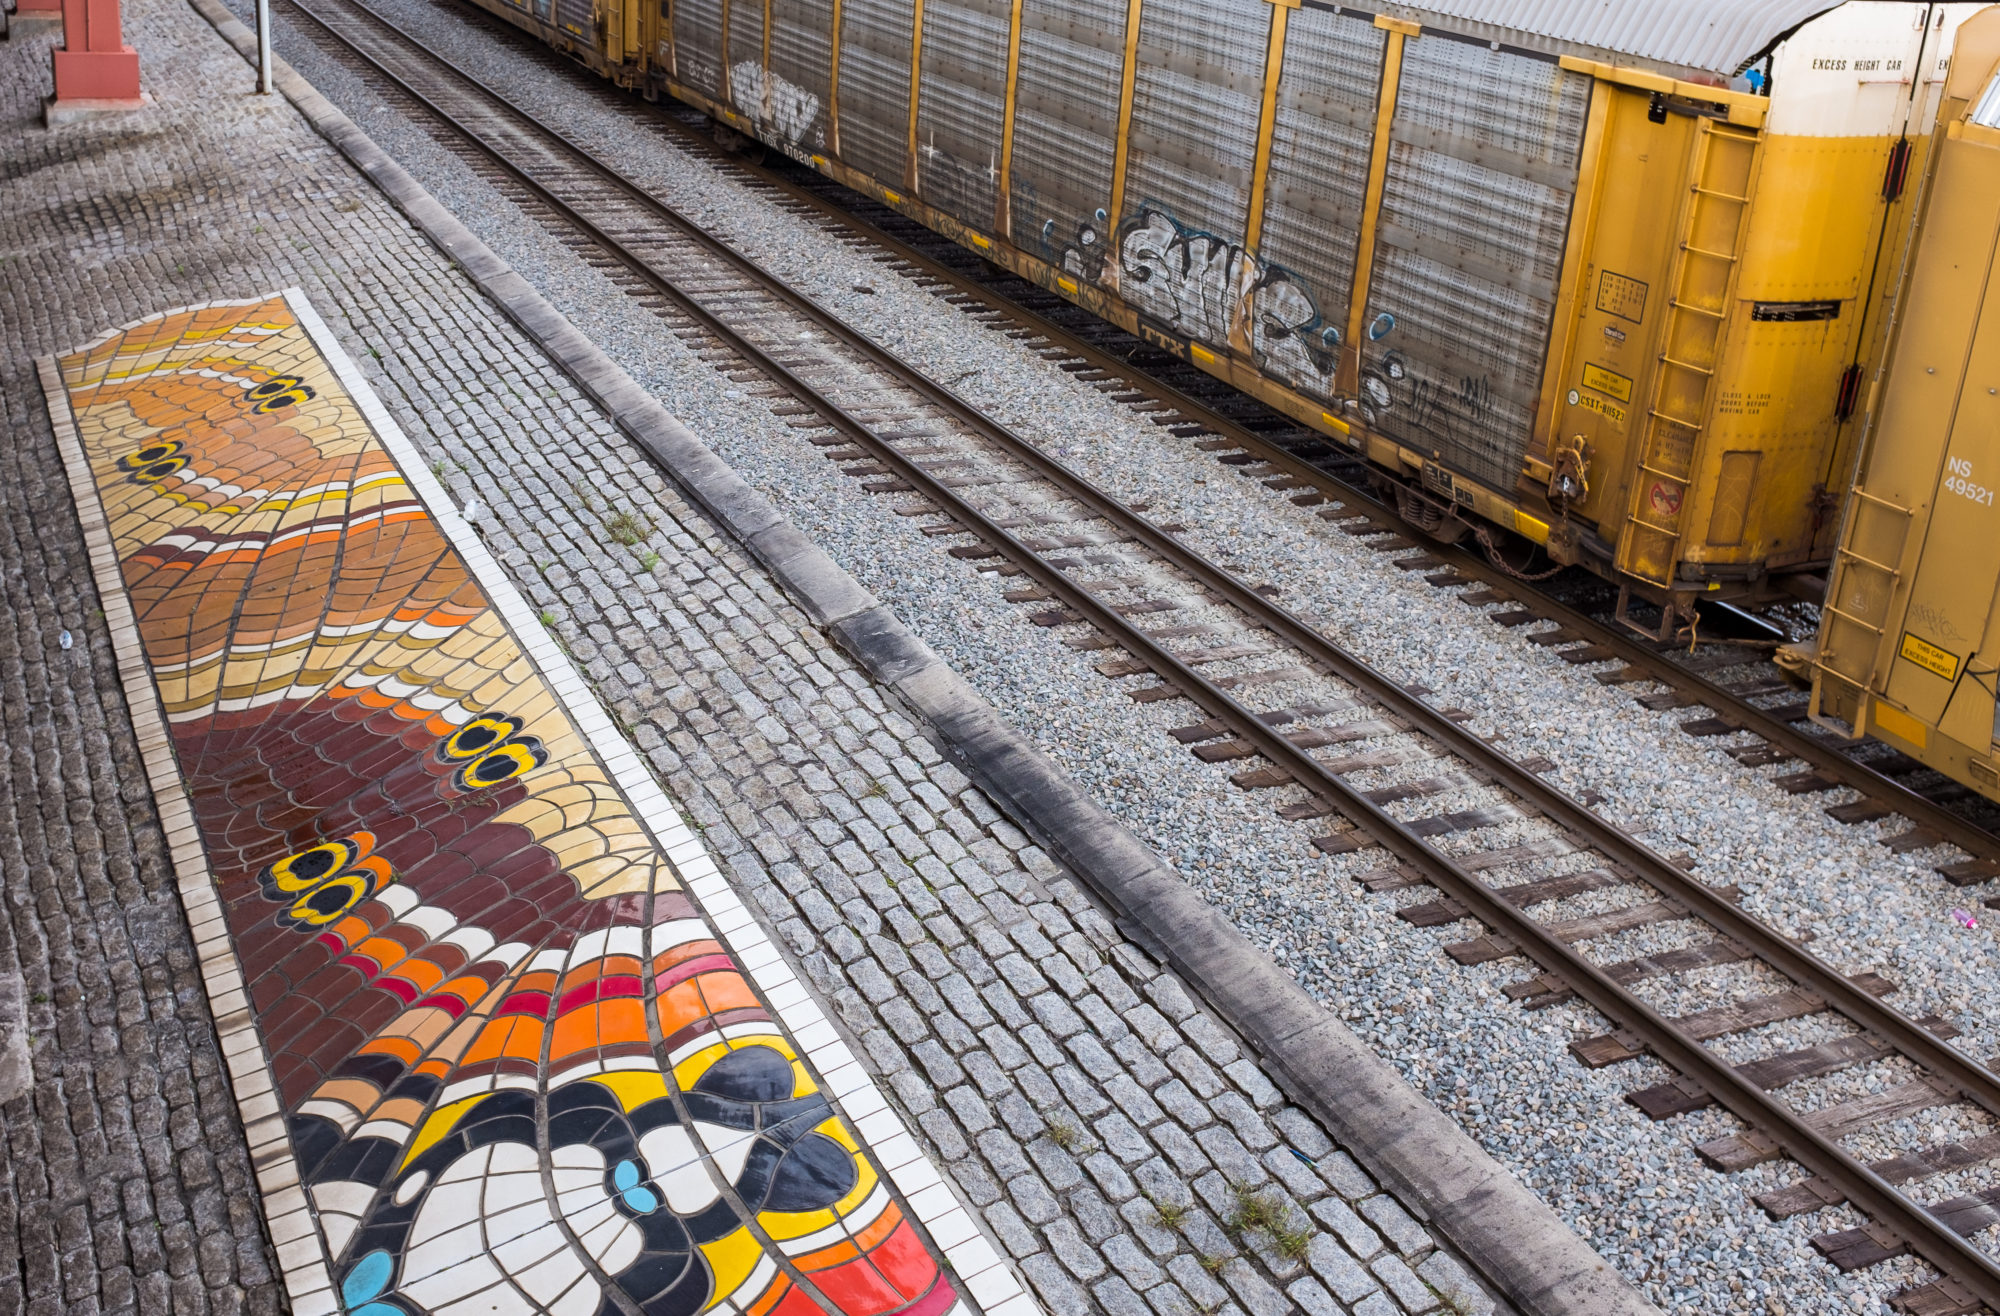 A colorful tile mural on cobblestone by train tracks